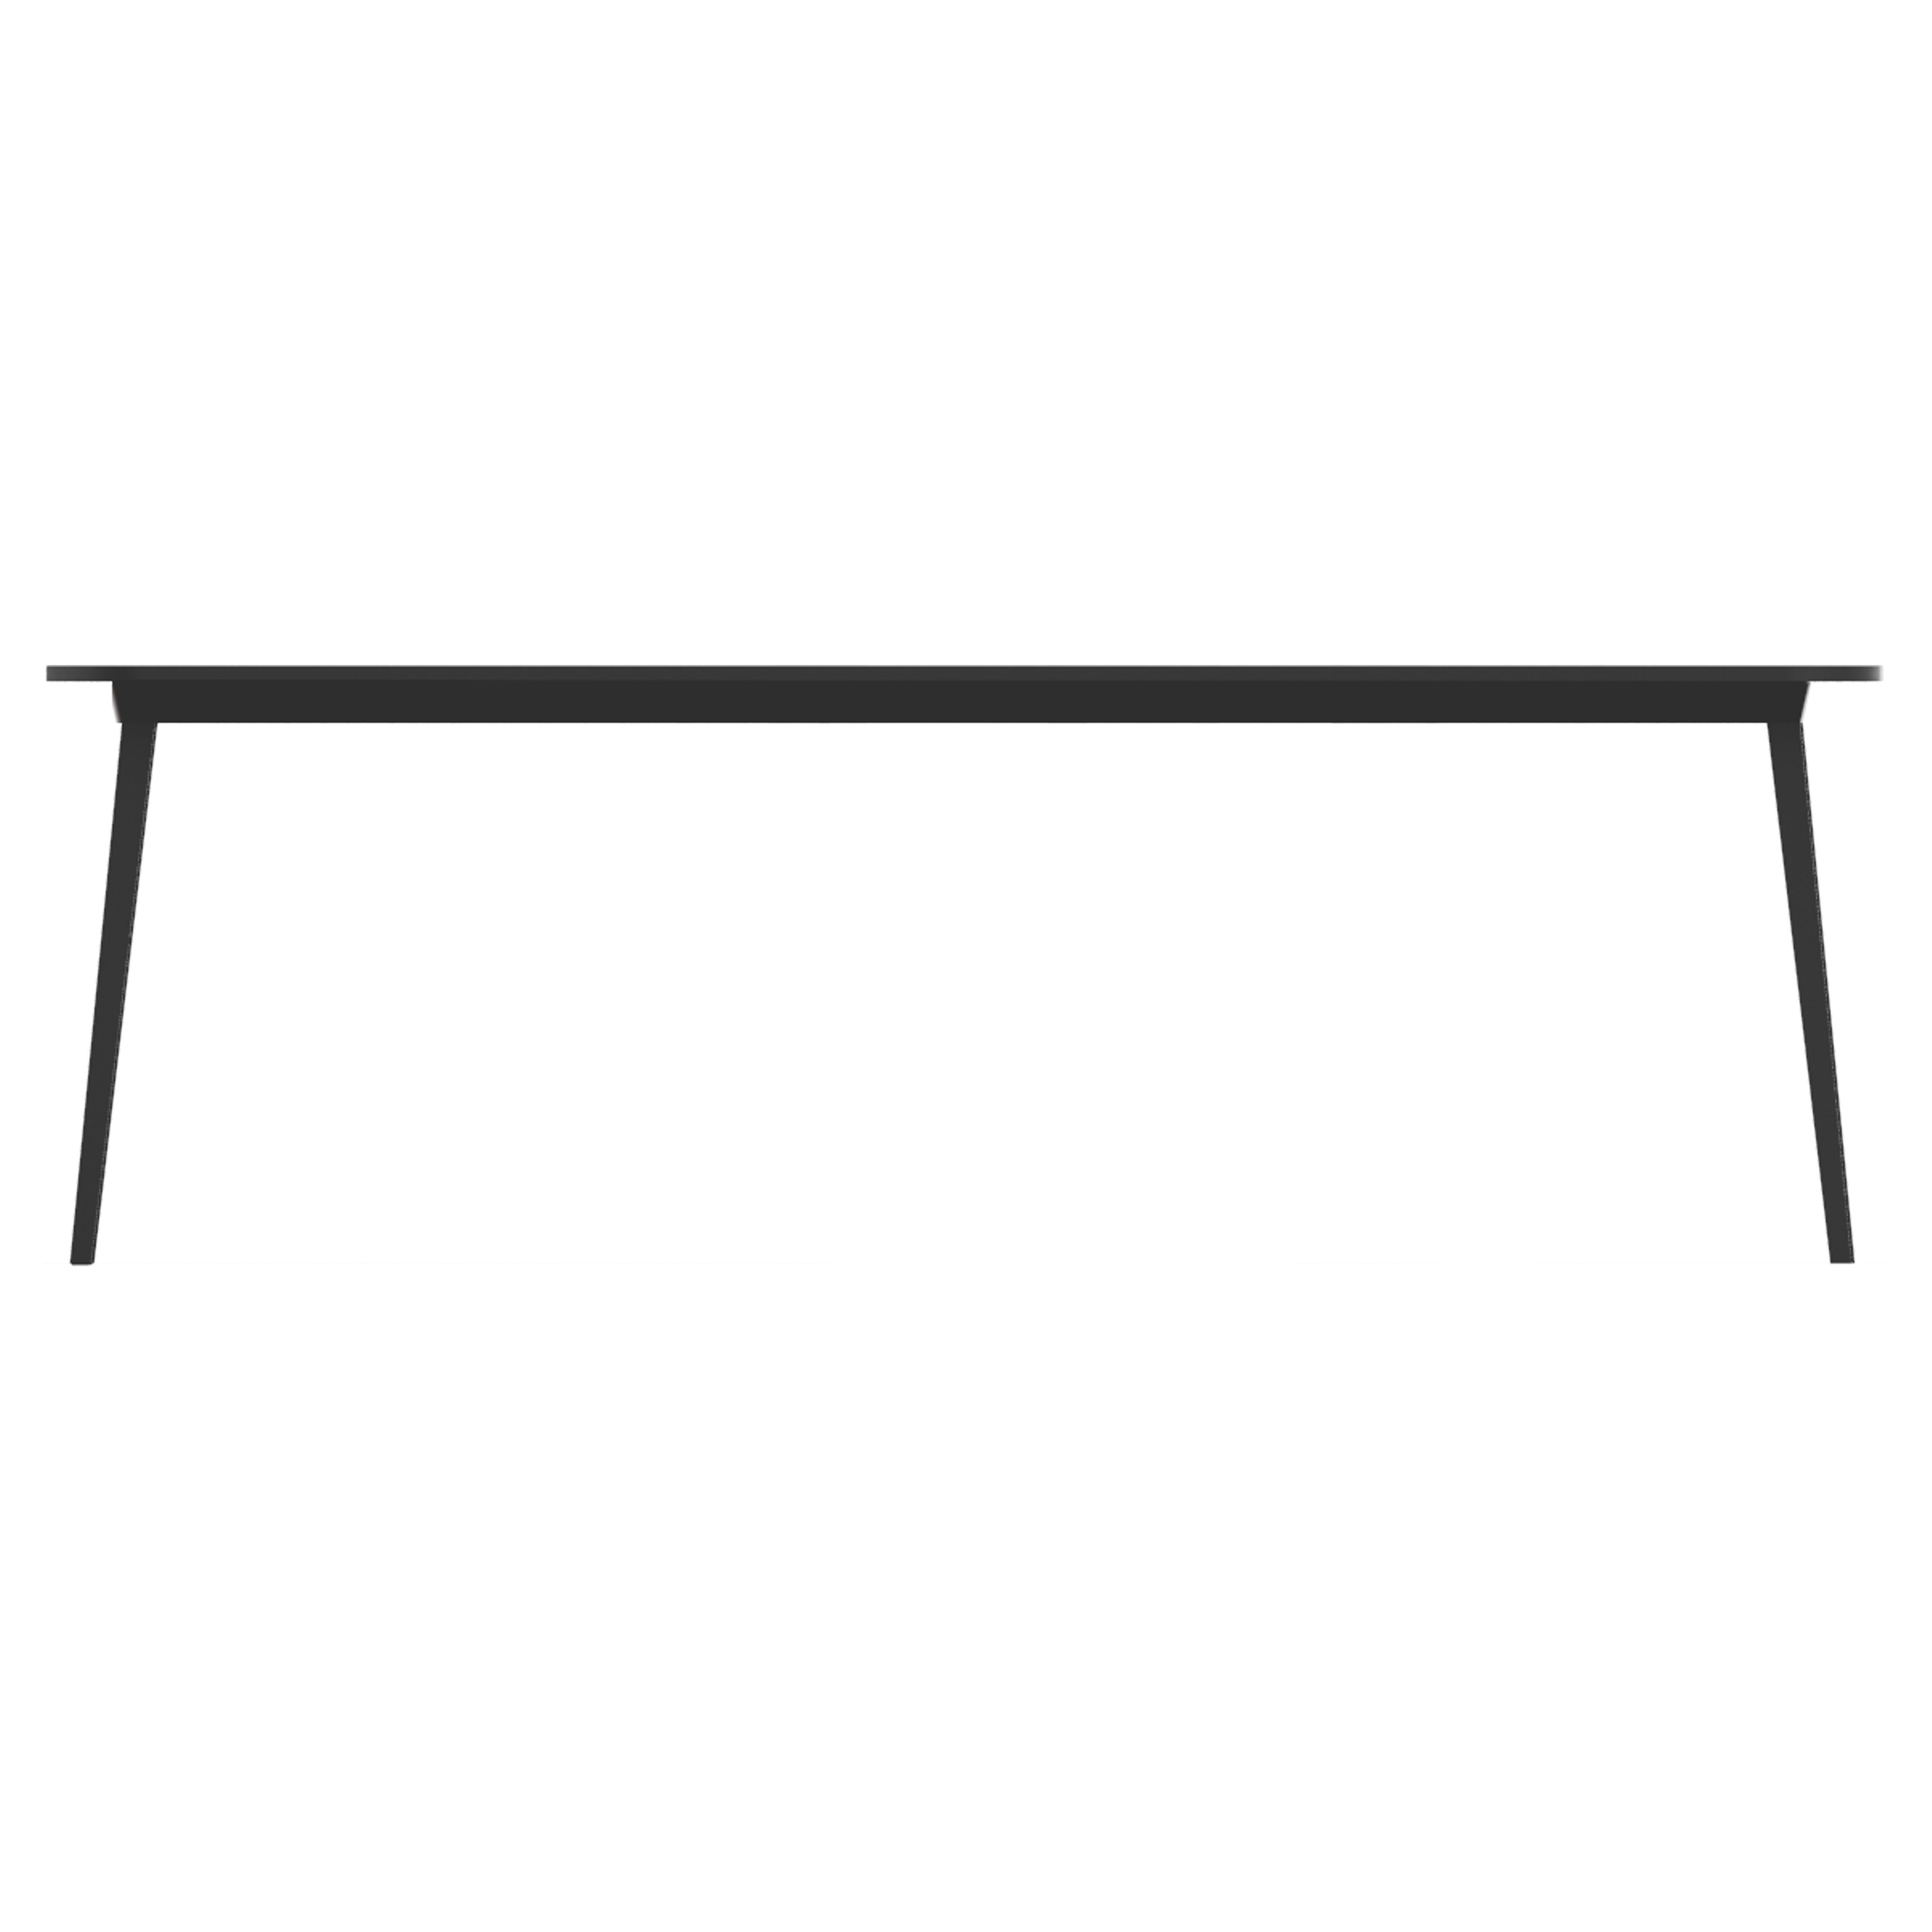 X is a family of tables of different sizes, composed of an extensible aluminum structure with wooden top or single-material in total black plastic. The extendable table can accomodate eight seats, thanks to the module that can be removed from the